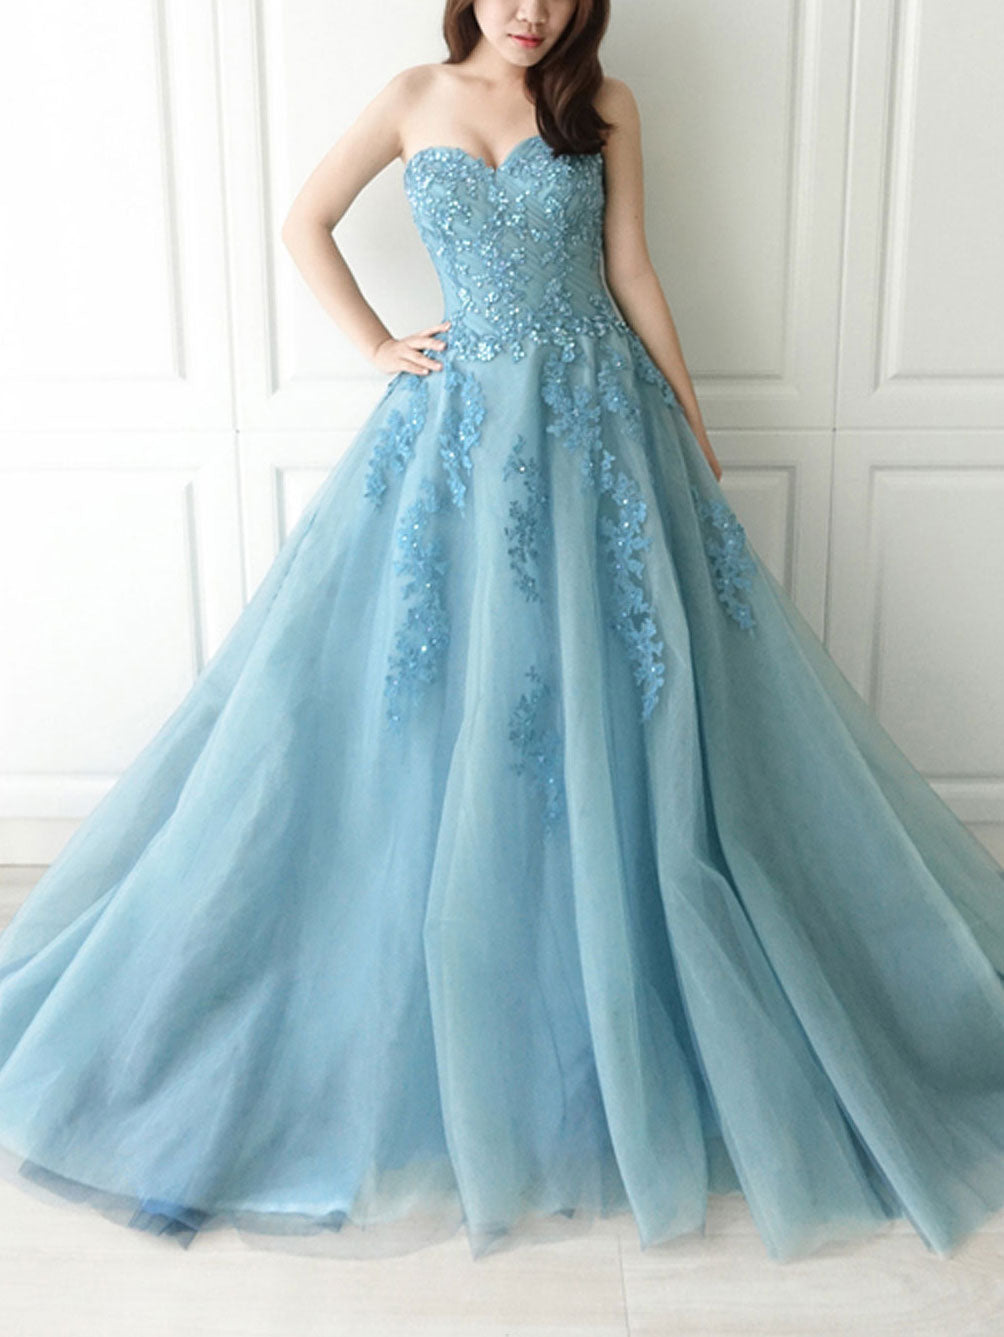 Blue sweetheart neck tulle lace long prom dress blue evening dress